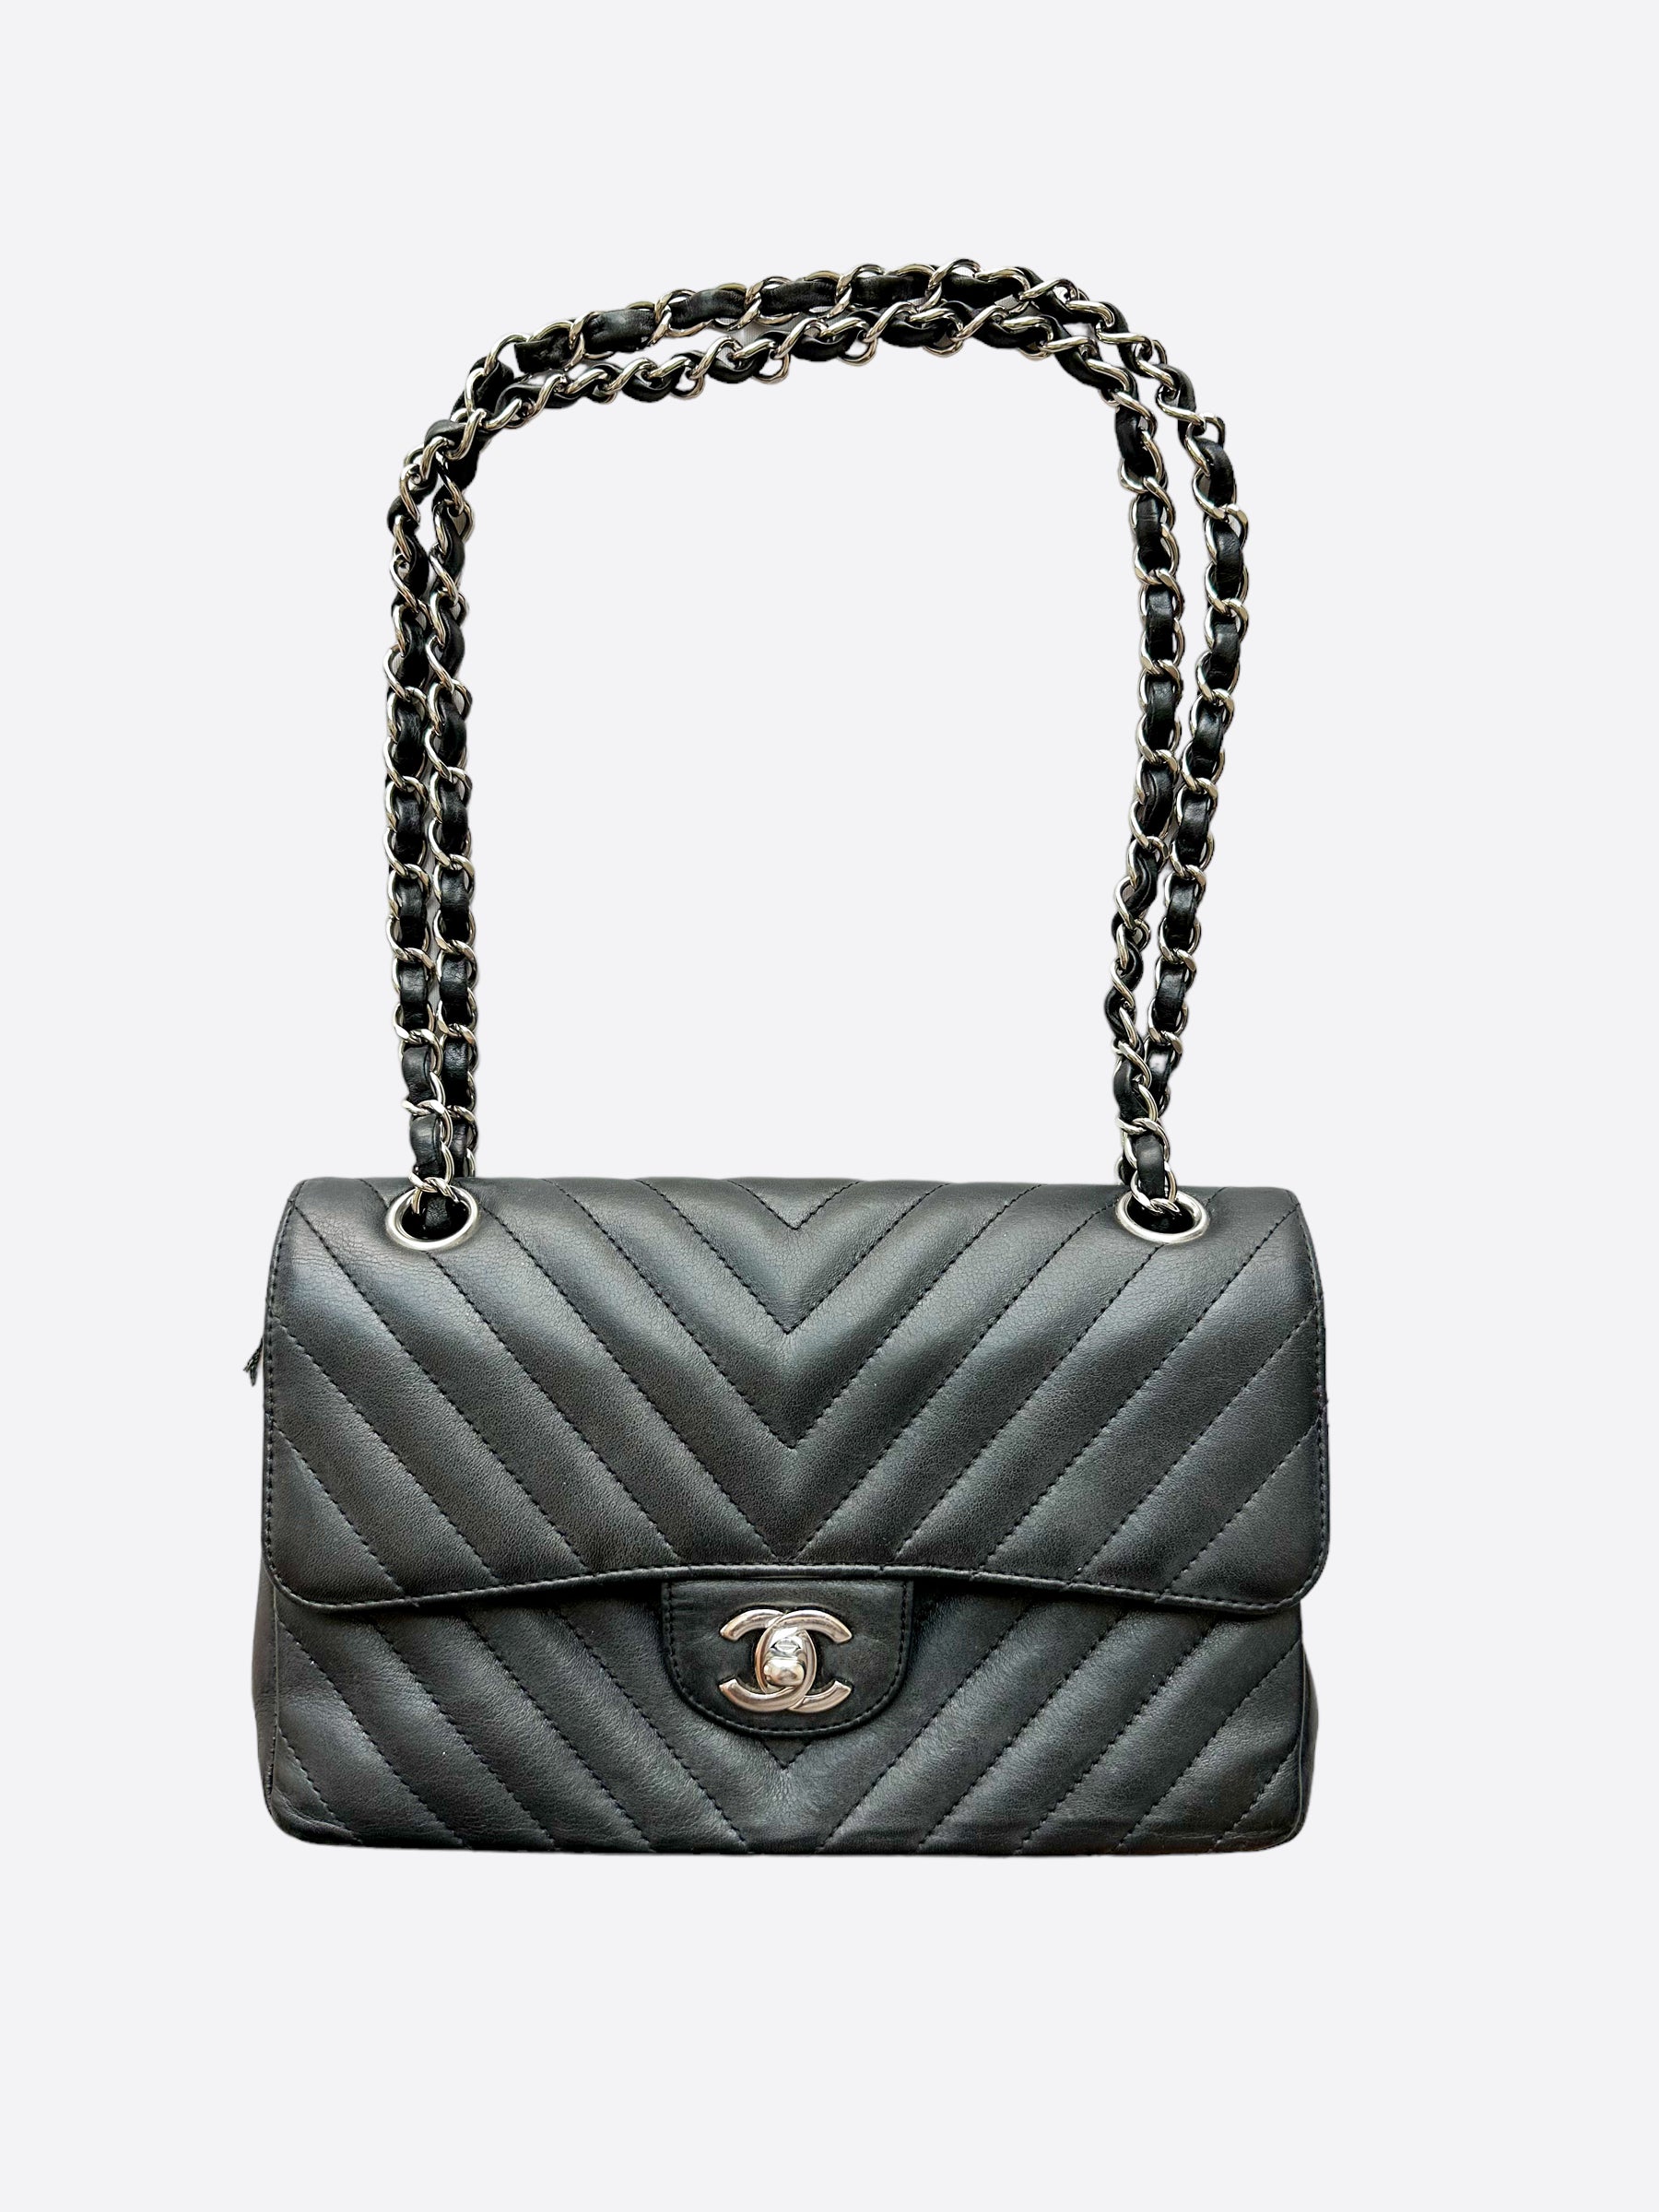 Chanel Caviar Quilted Mini Chain Bag Black